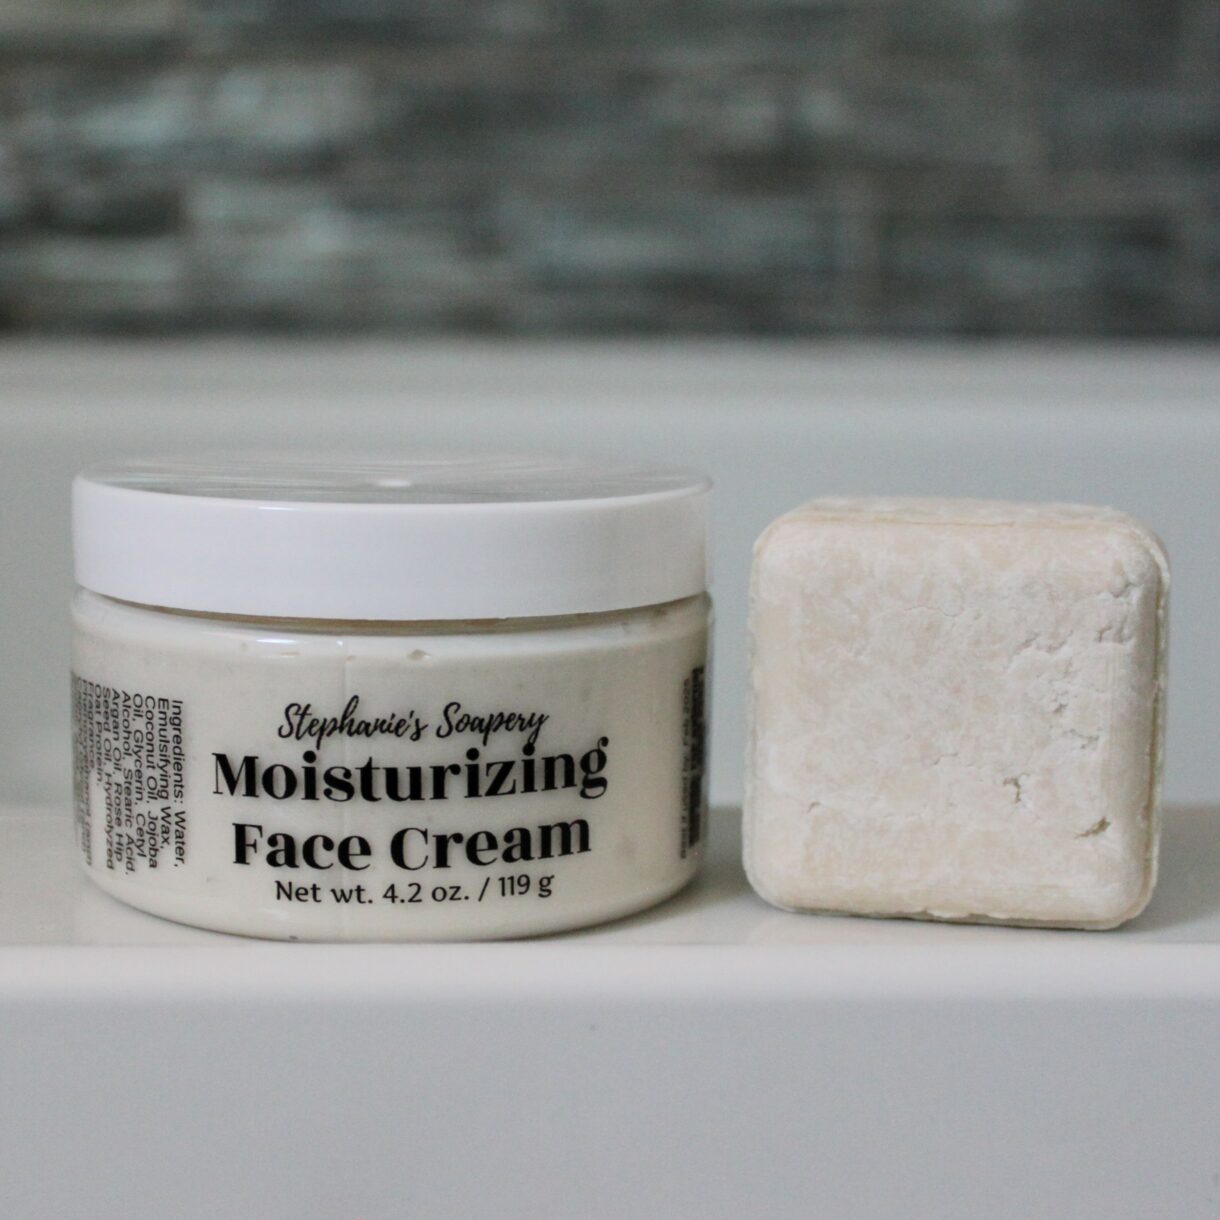 Jar of face cream and a face cleansing bar